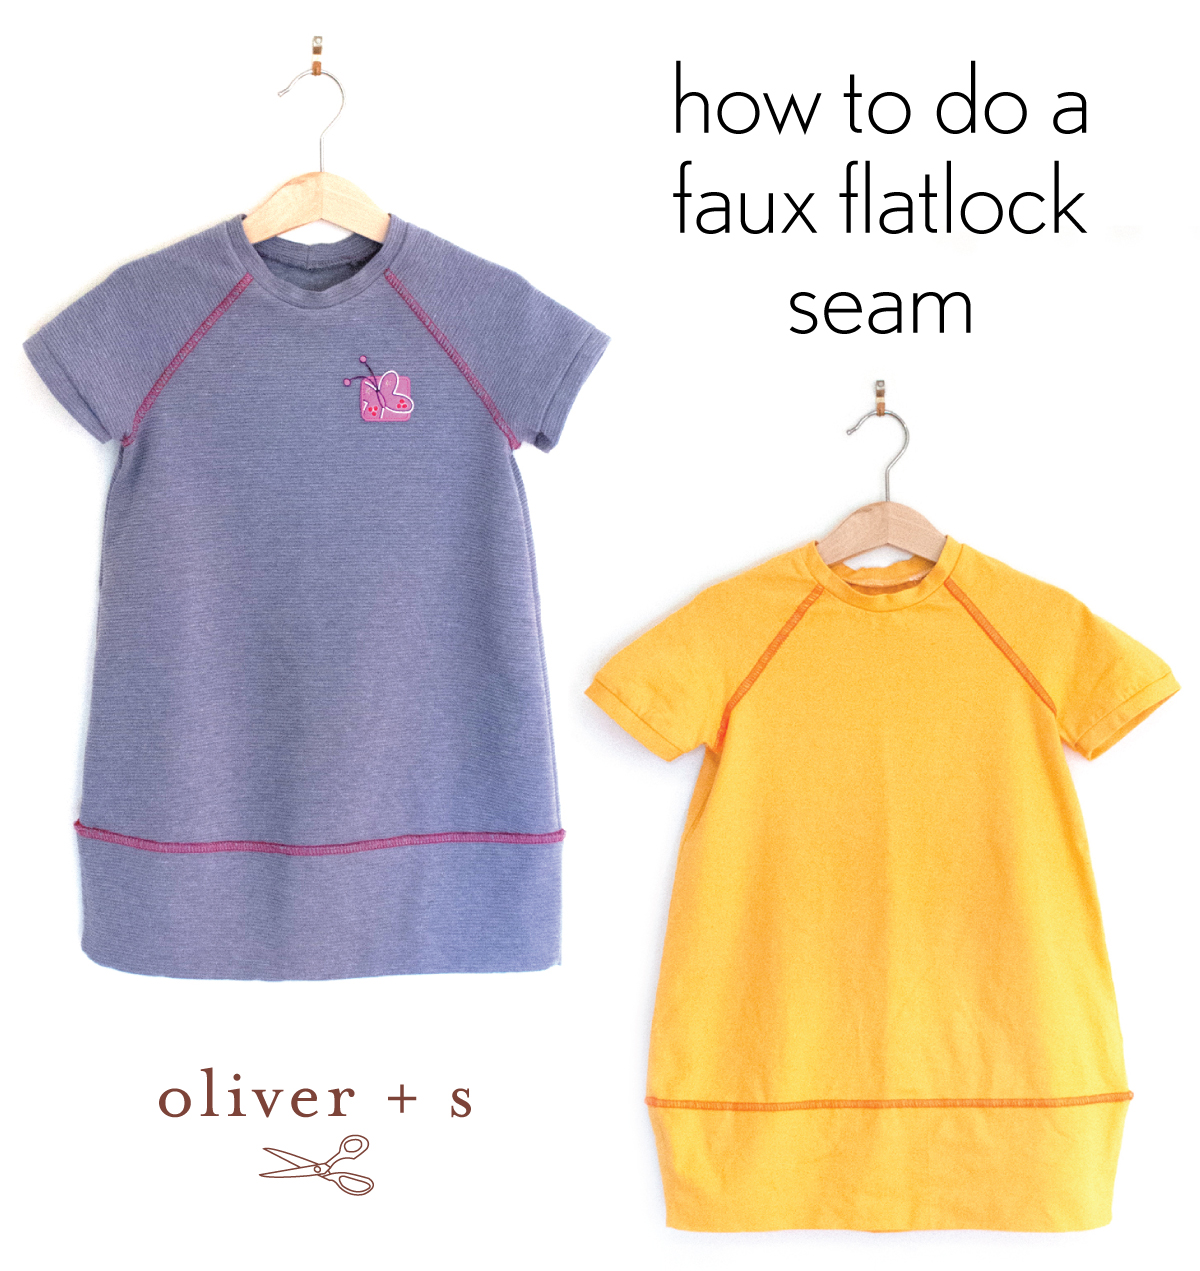 serger flatlock stitch Archives - over the edge